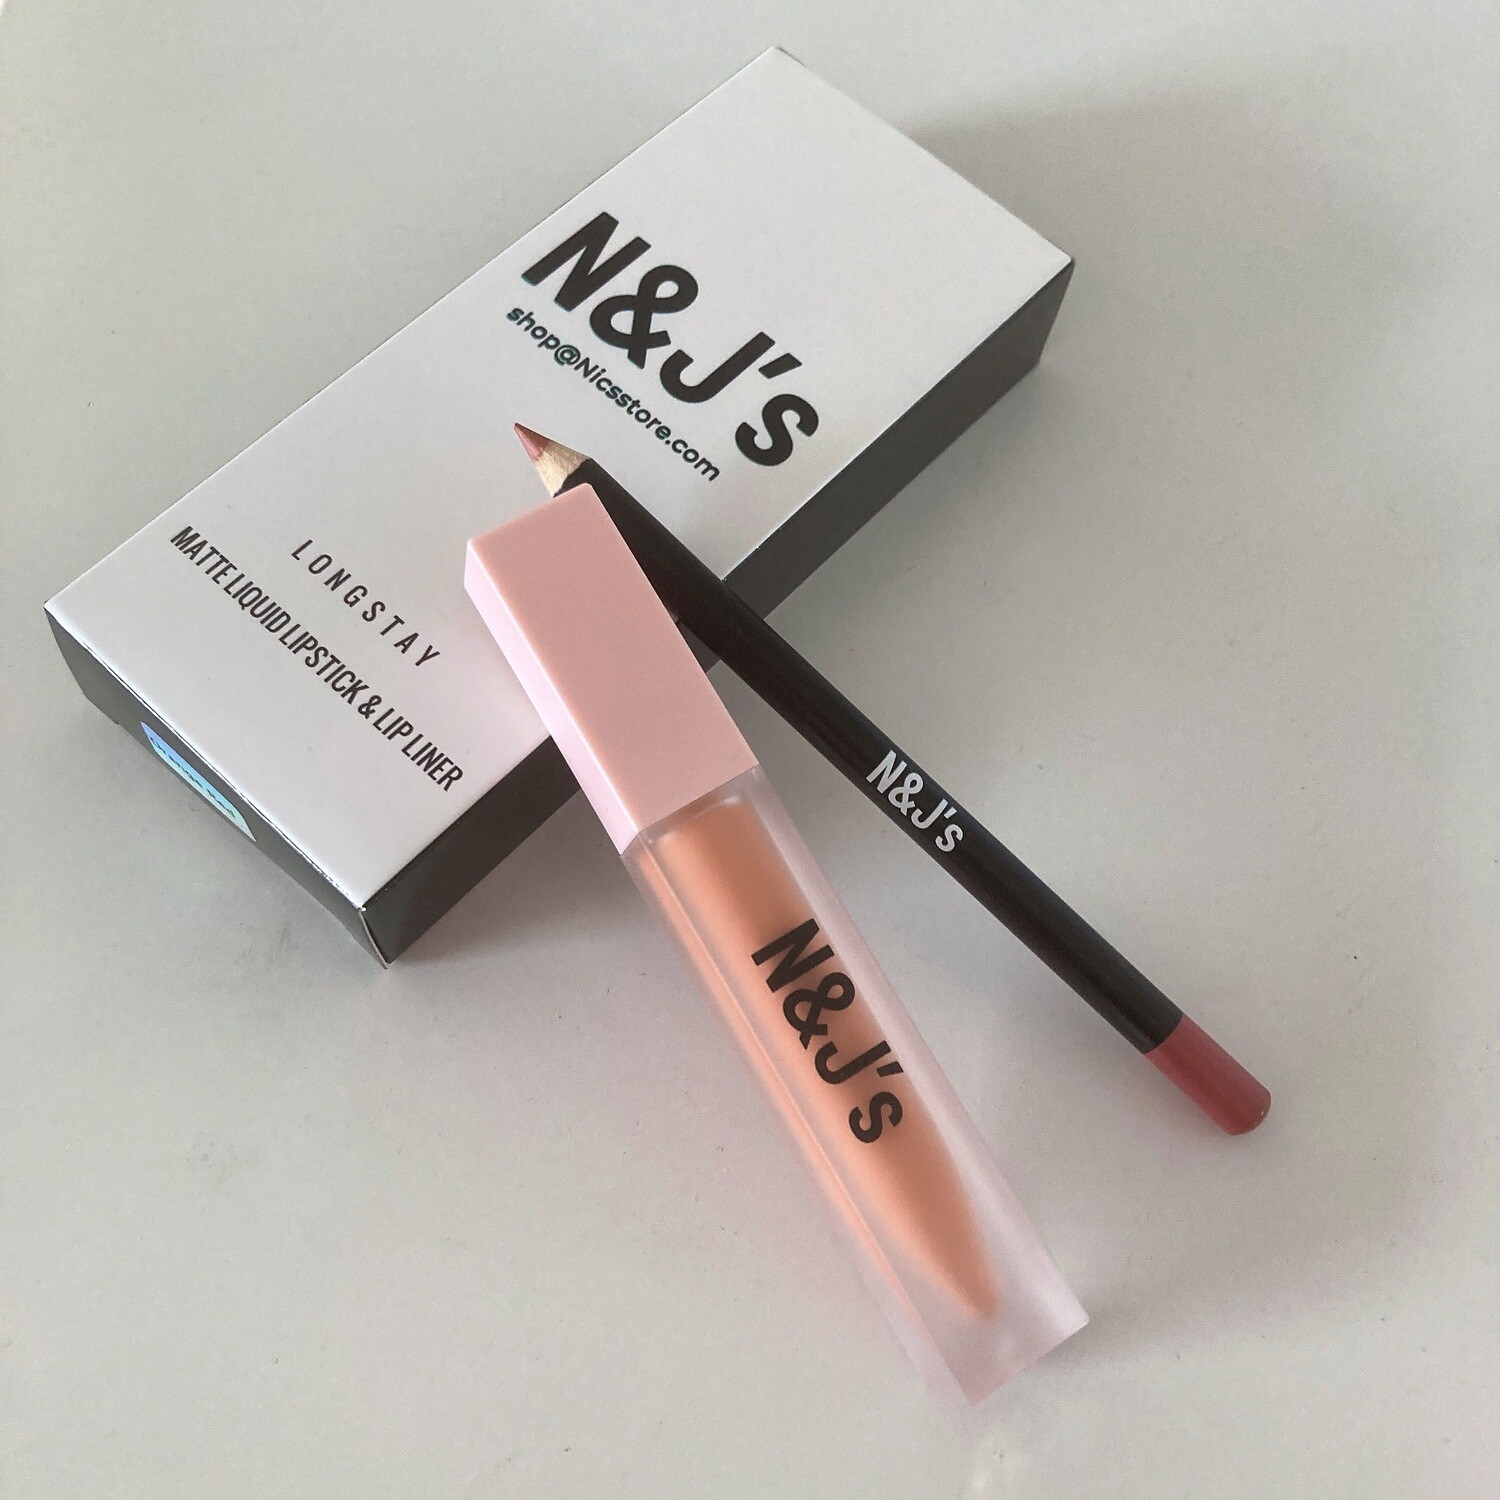 Get Two in one matching lipstick and lipliner